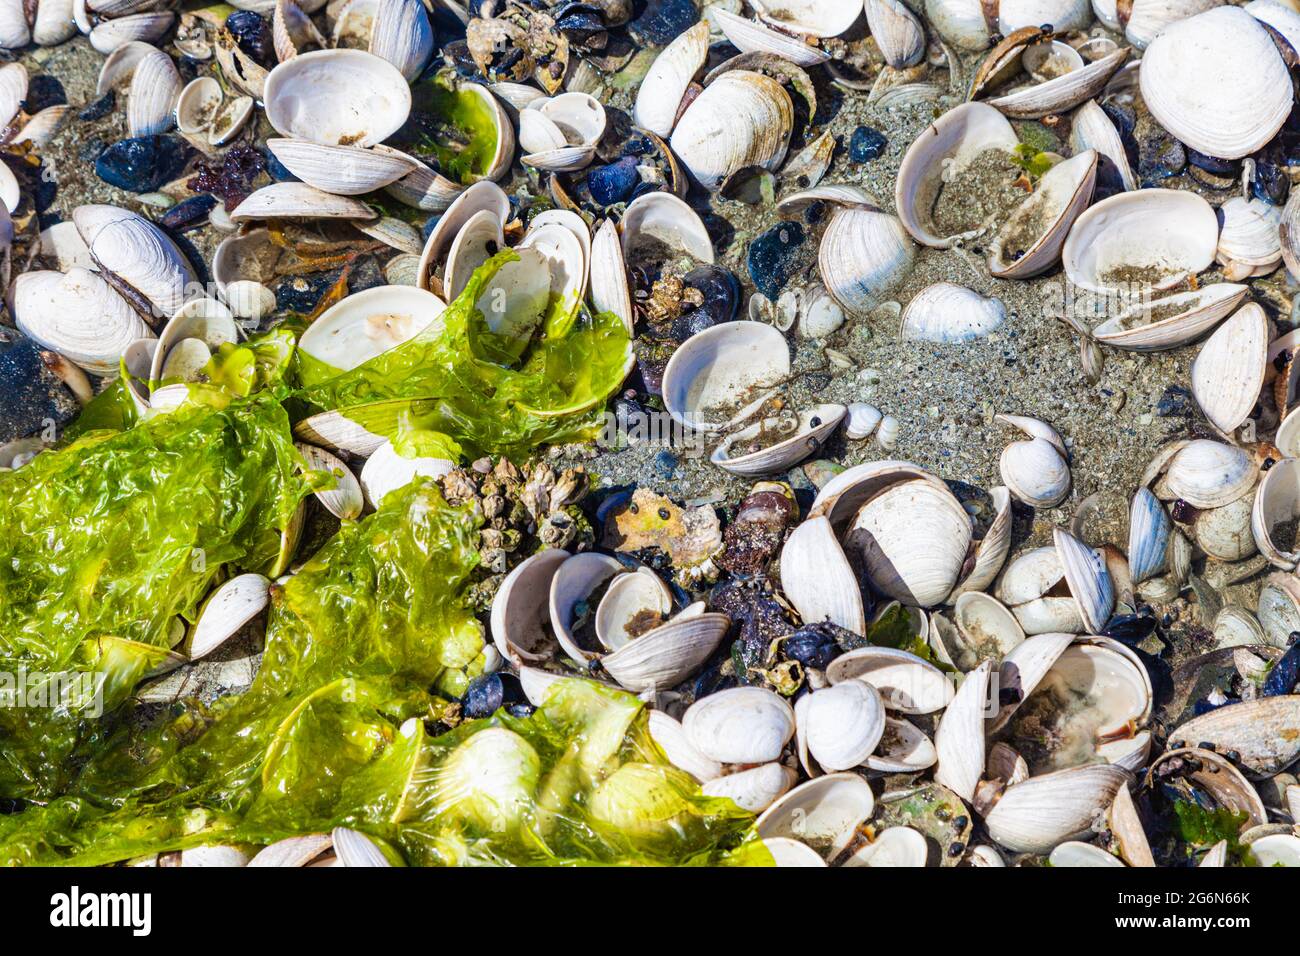 Abstract image of open clam shells exposed at low tide on a Vancouver Island beach in Canada Stock Photo